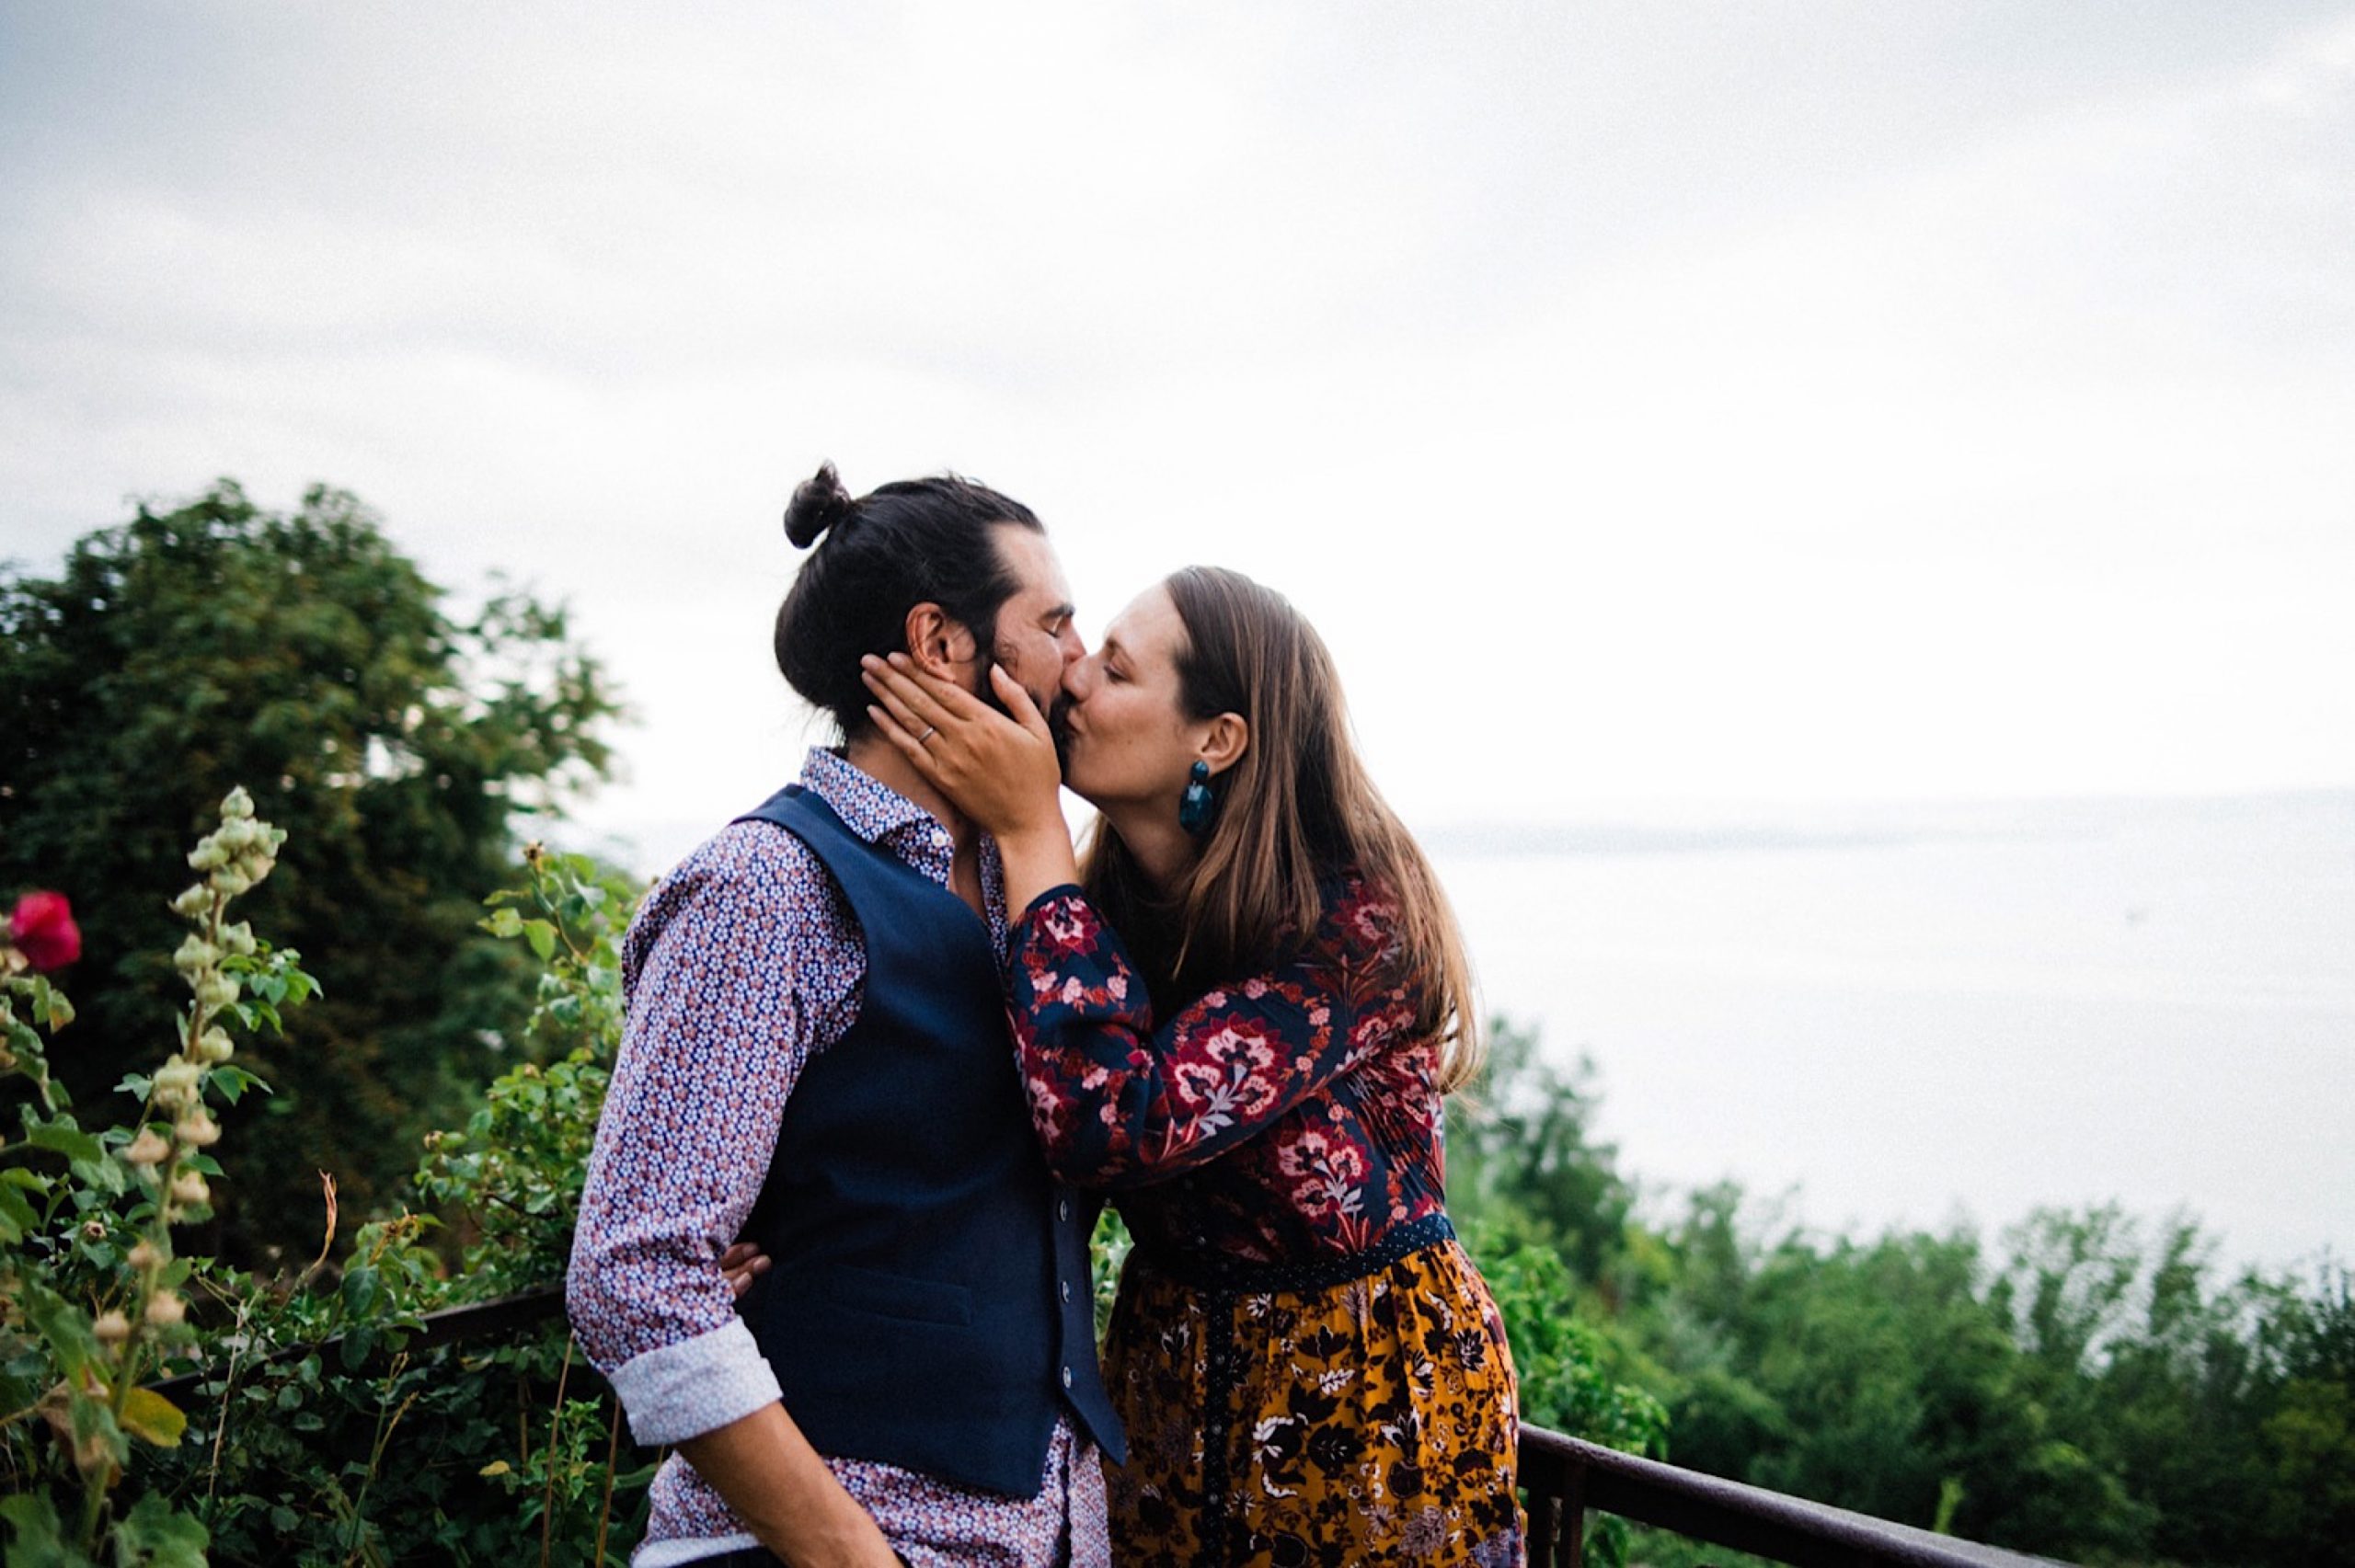 Relaxed wedding photography of a newlywed couple kissing in front of a garden, looking over the Adriatic Sea near Trieste.